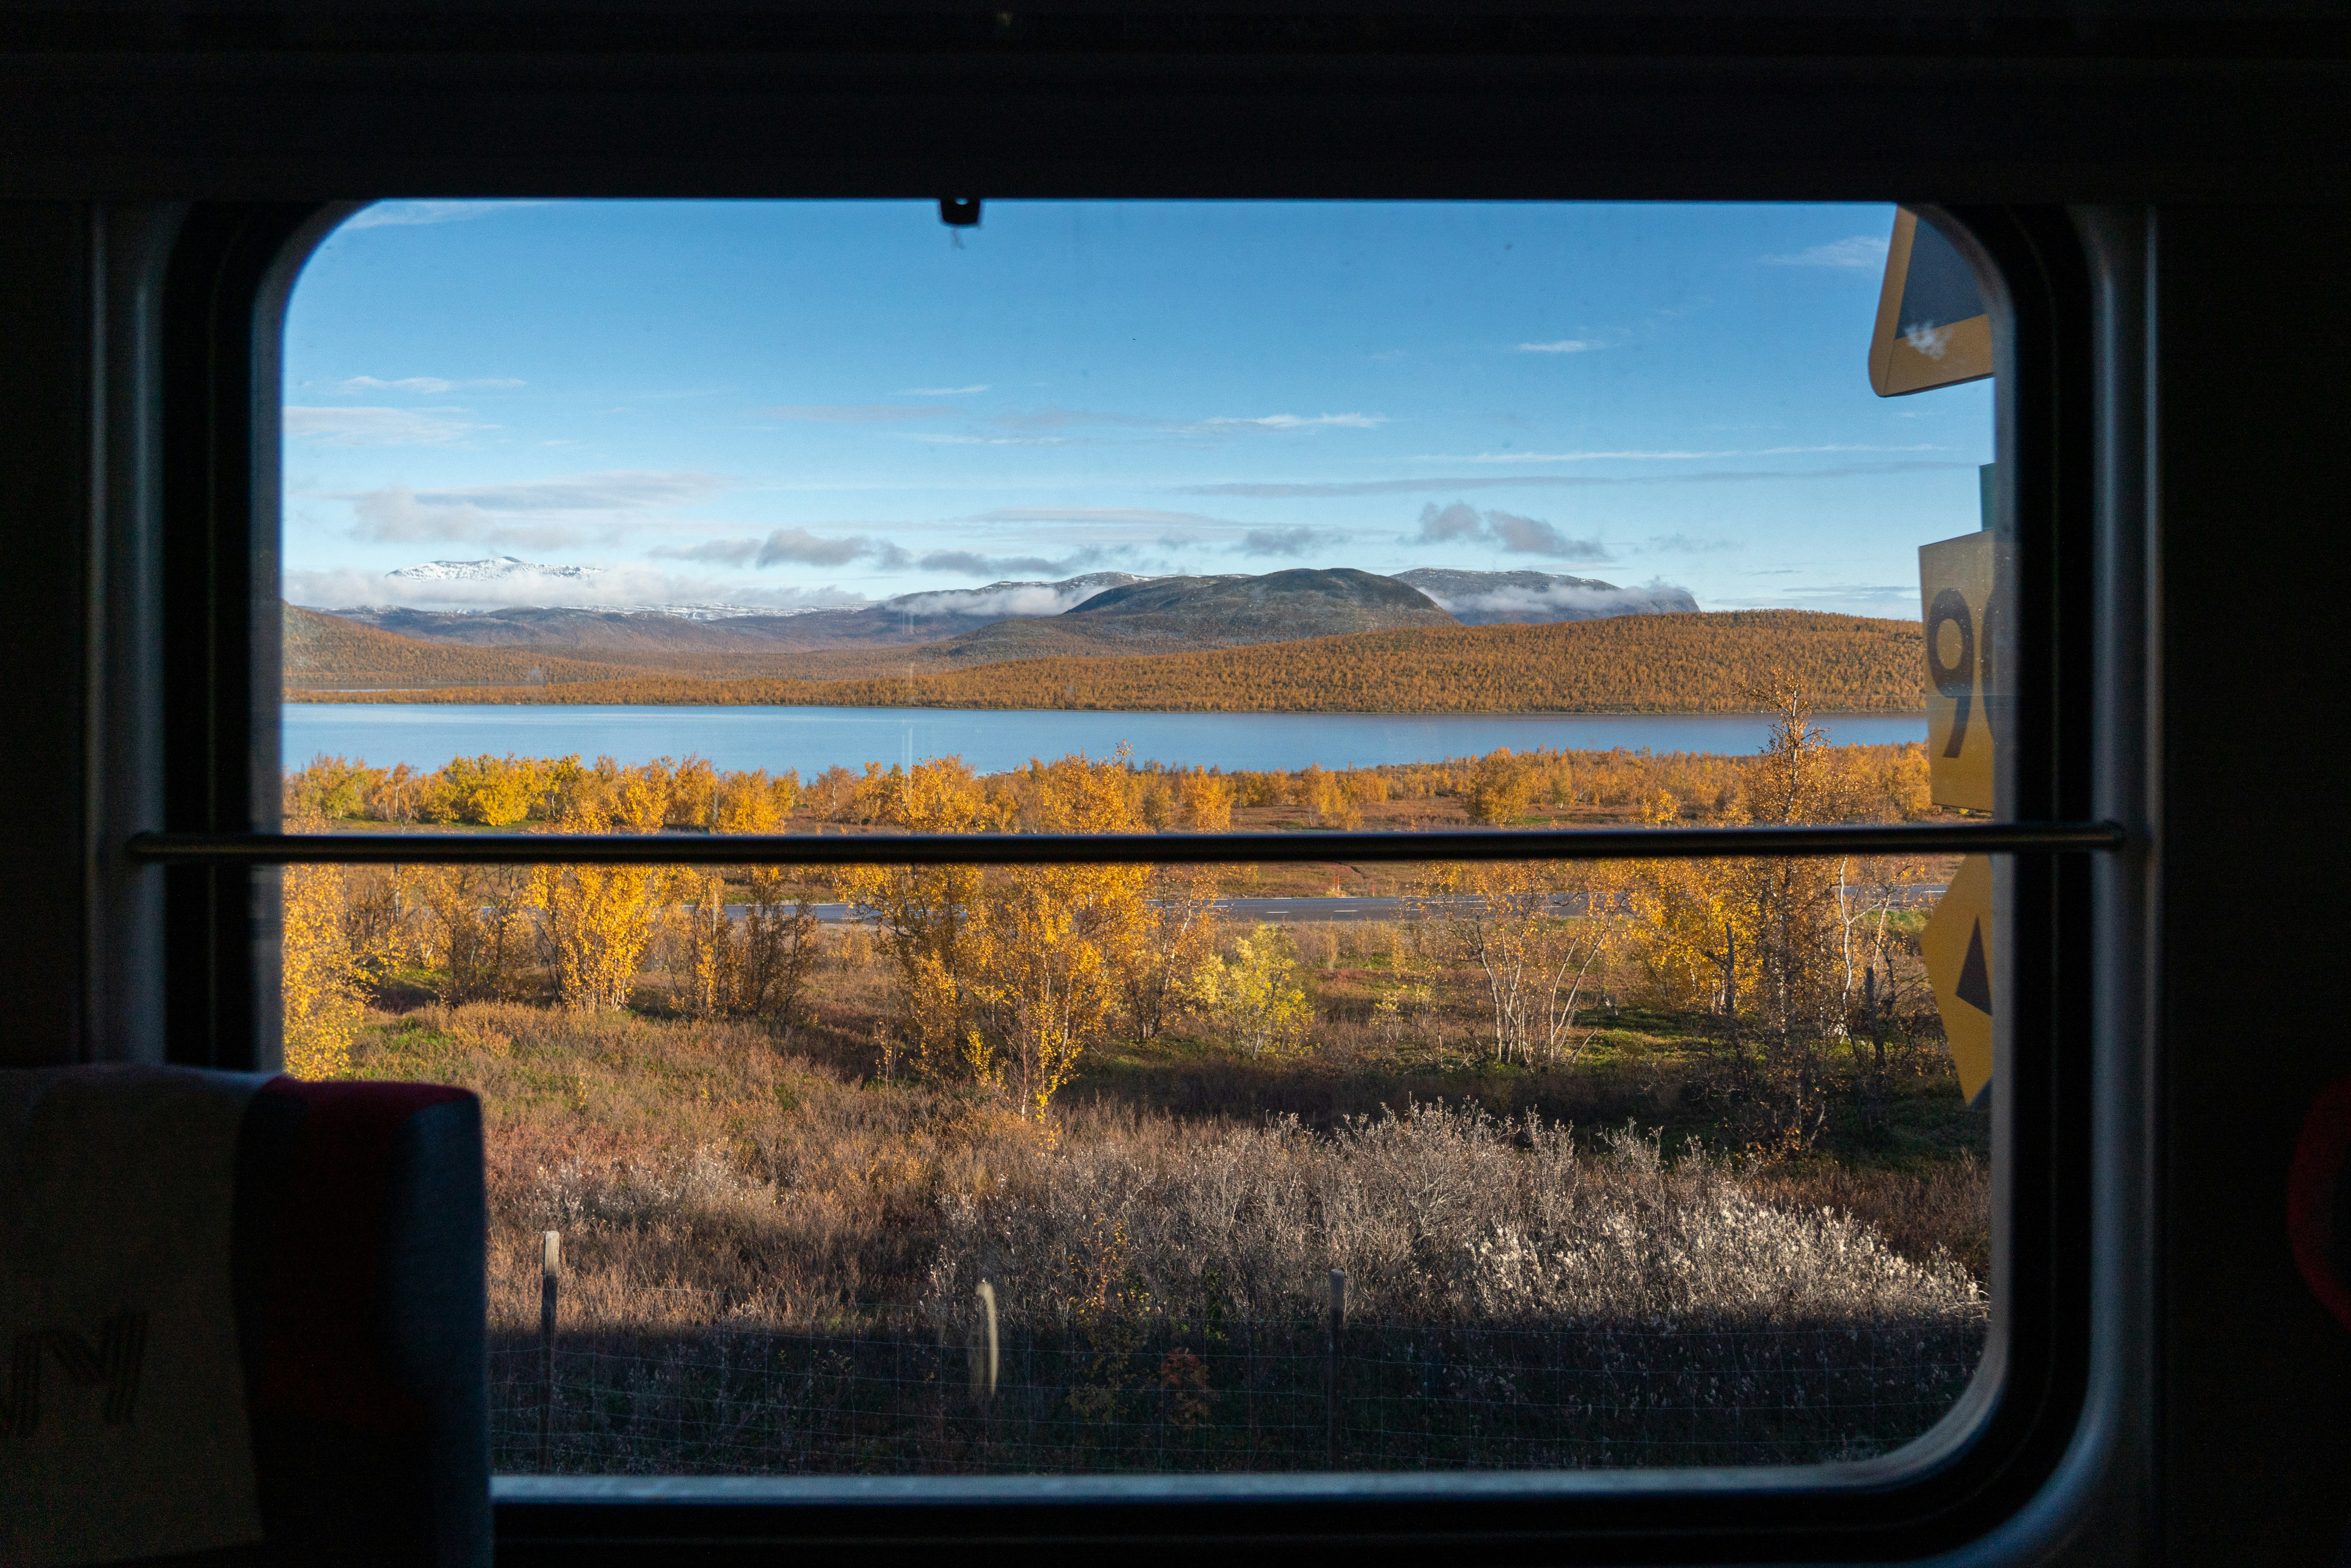 Window views from a train of Sweden's Abisko National Park